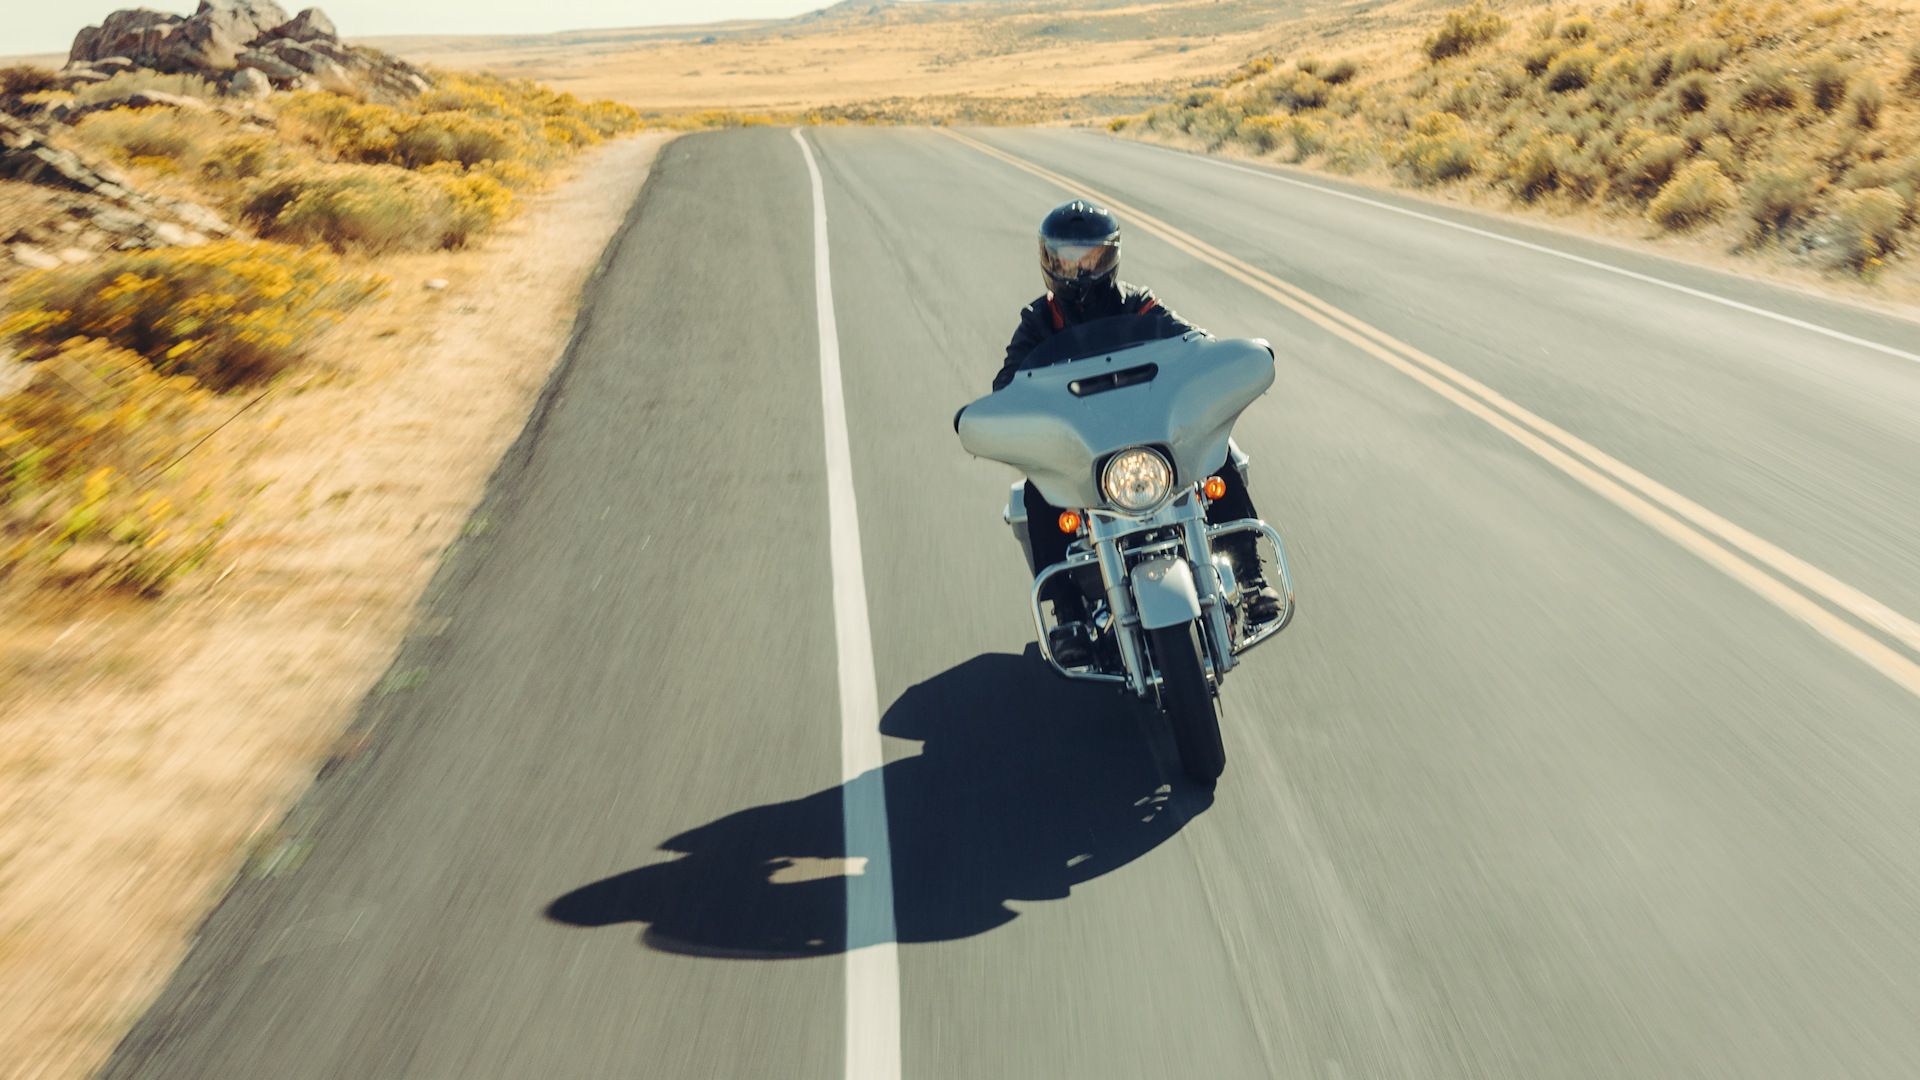 10 Reasons Why The Harley-Davidson Street Glide Is The Best Grand American  Tourer